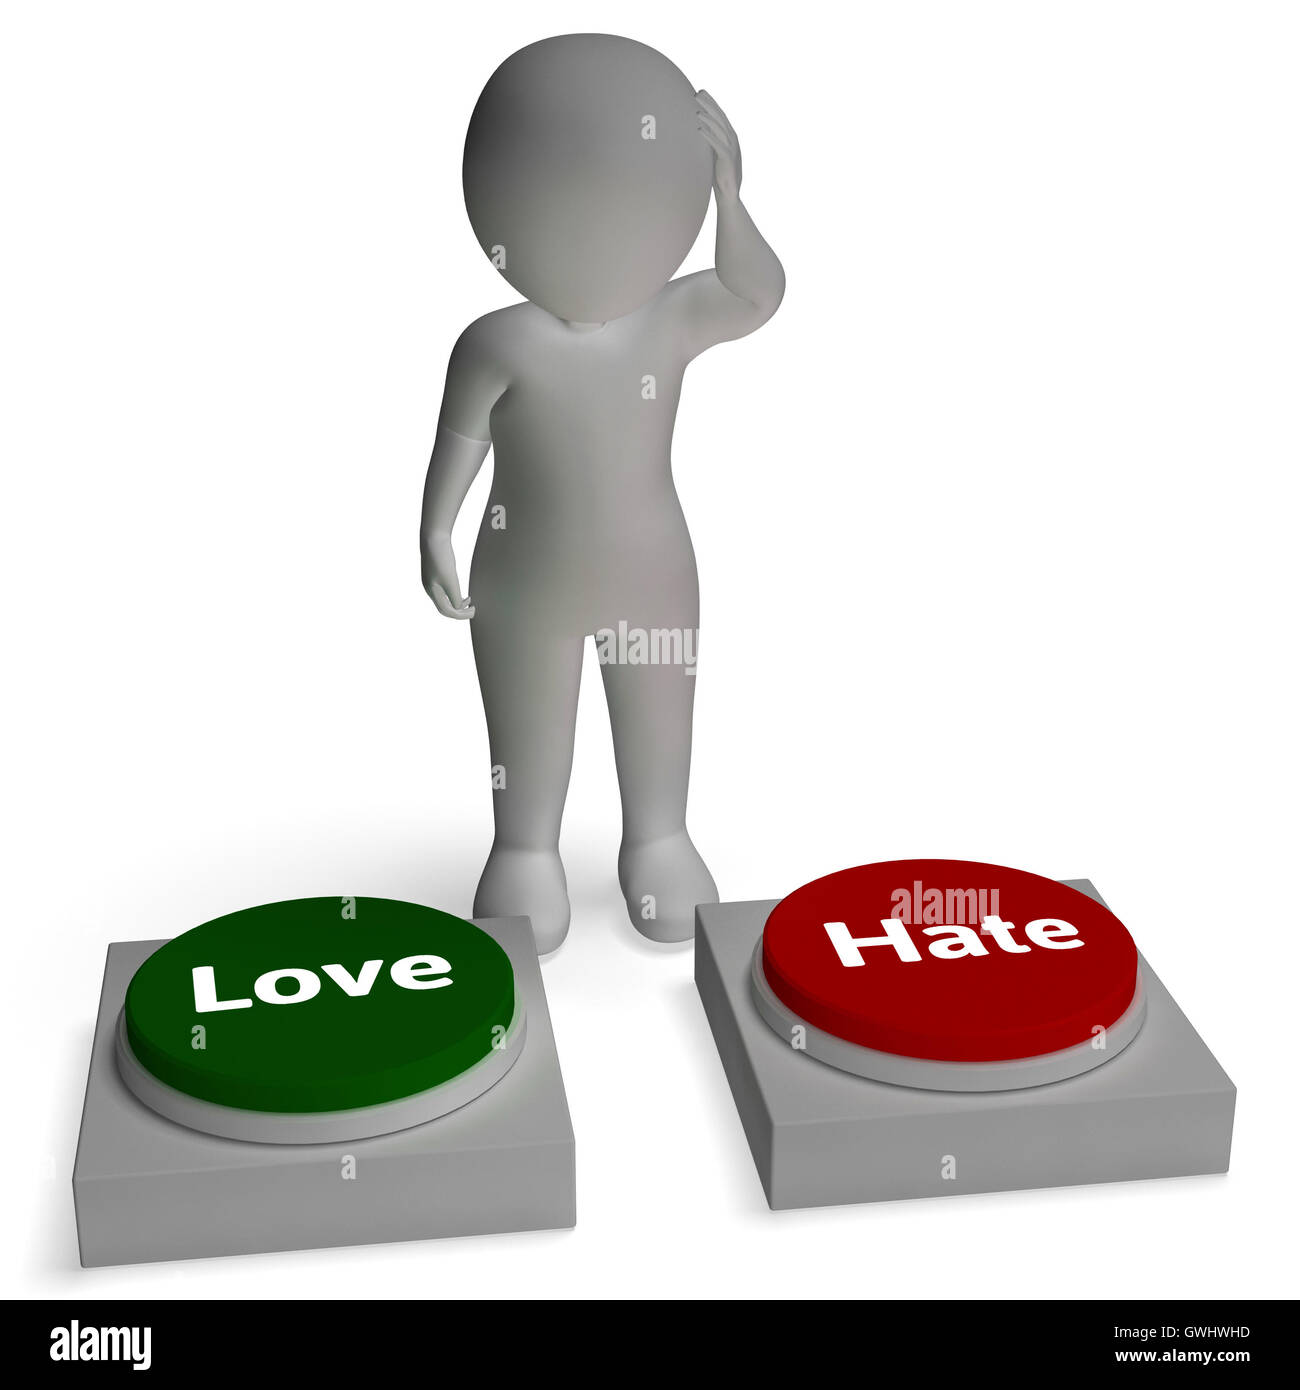 Love Hate Buttons Shows Loving And Hating Stock Photo